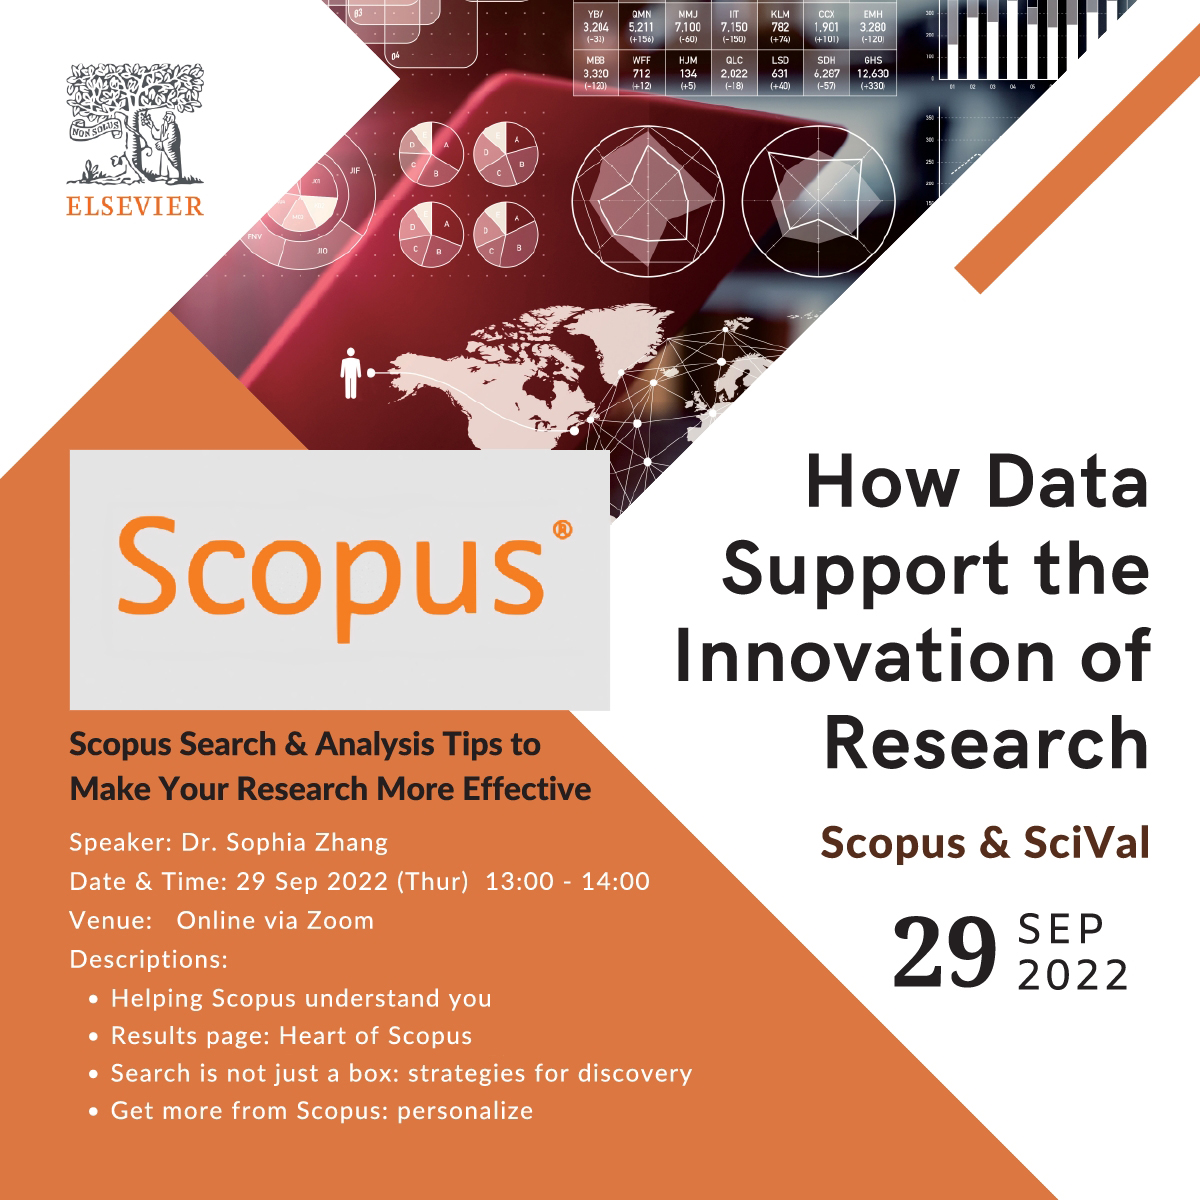 SCOPUS WEBINAR: How Data Support the Innovation of Research - Scopus Search & Analysis Tips to Make Your Research More Effective